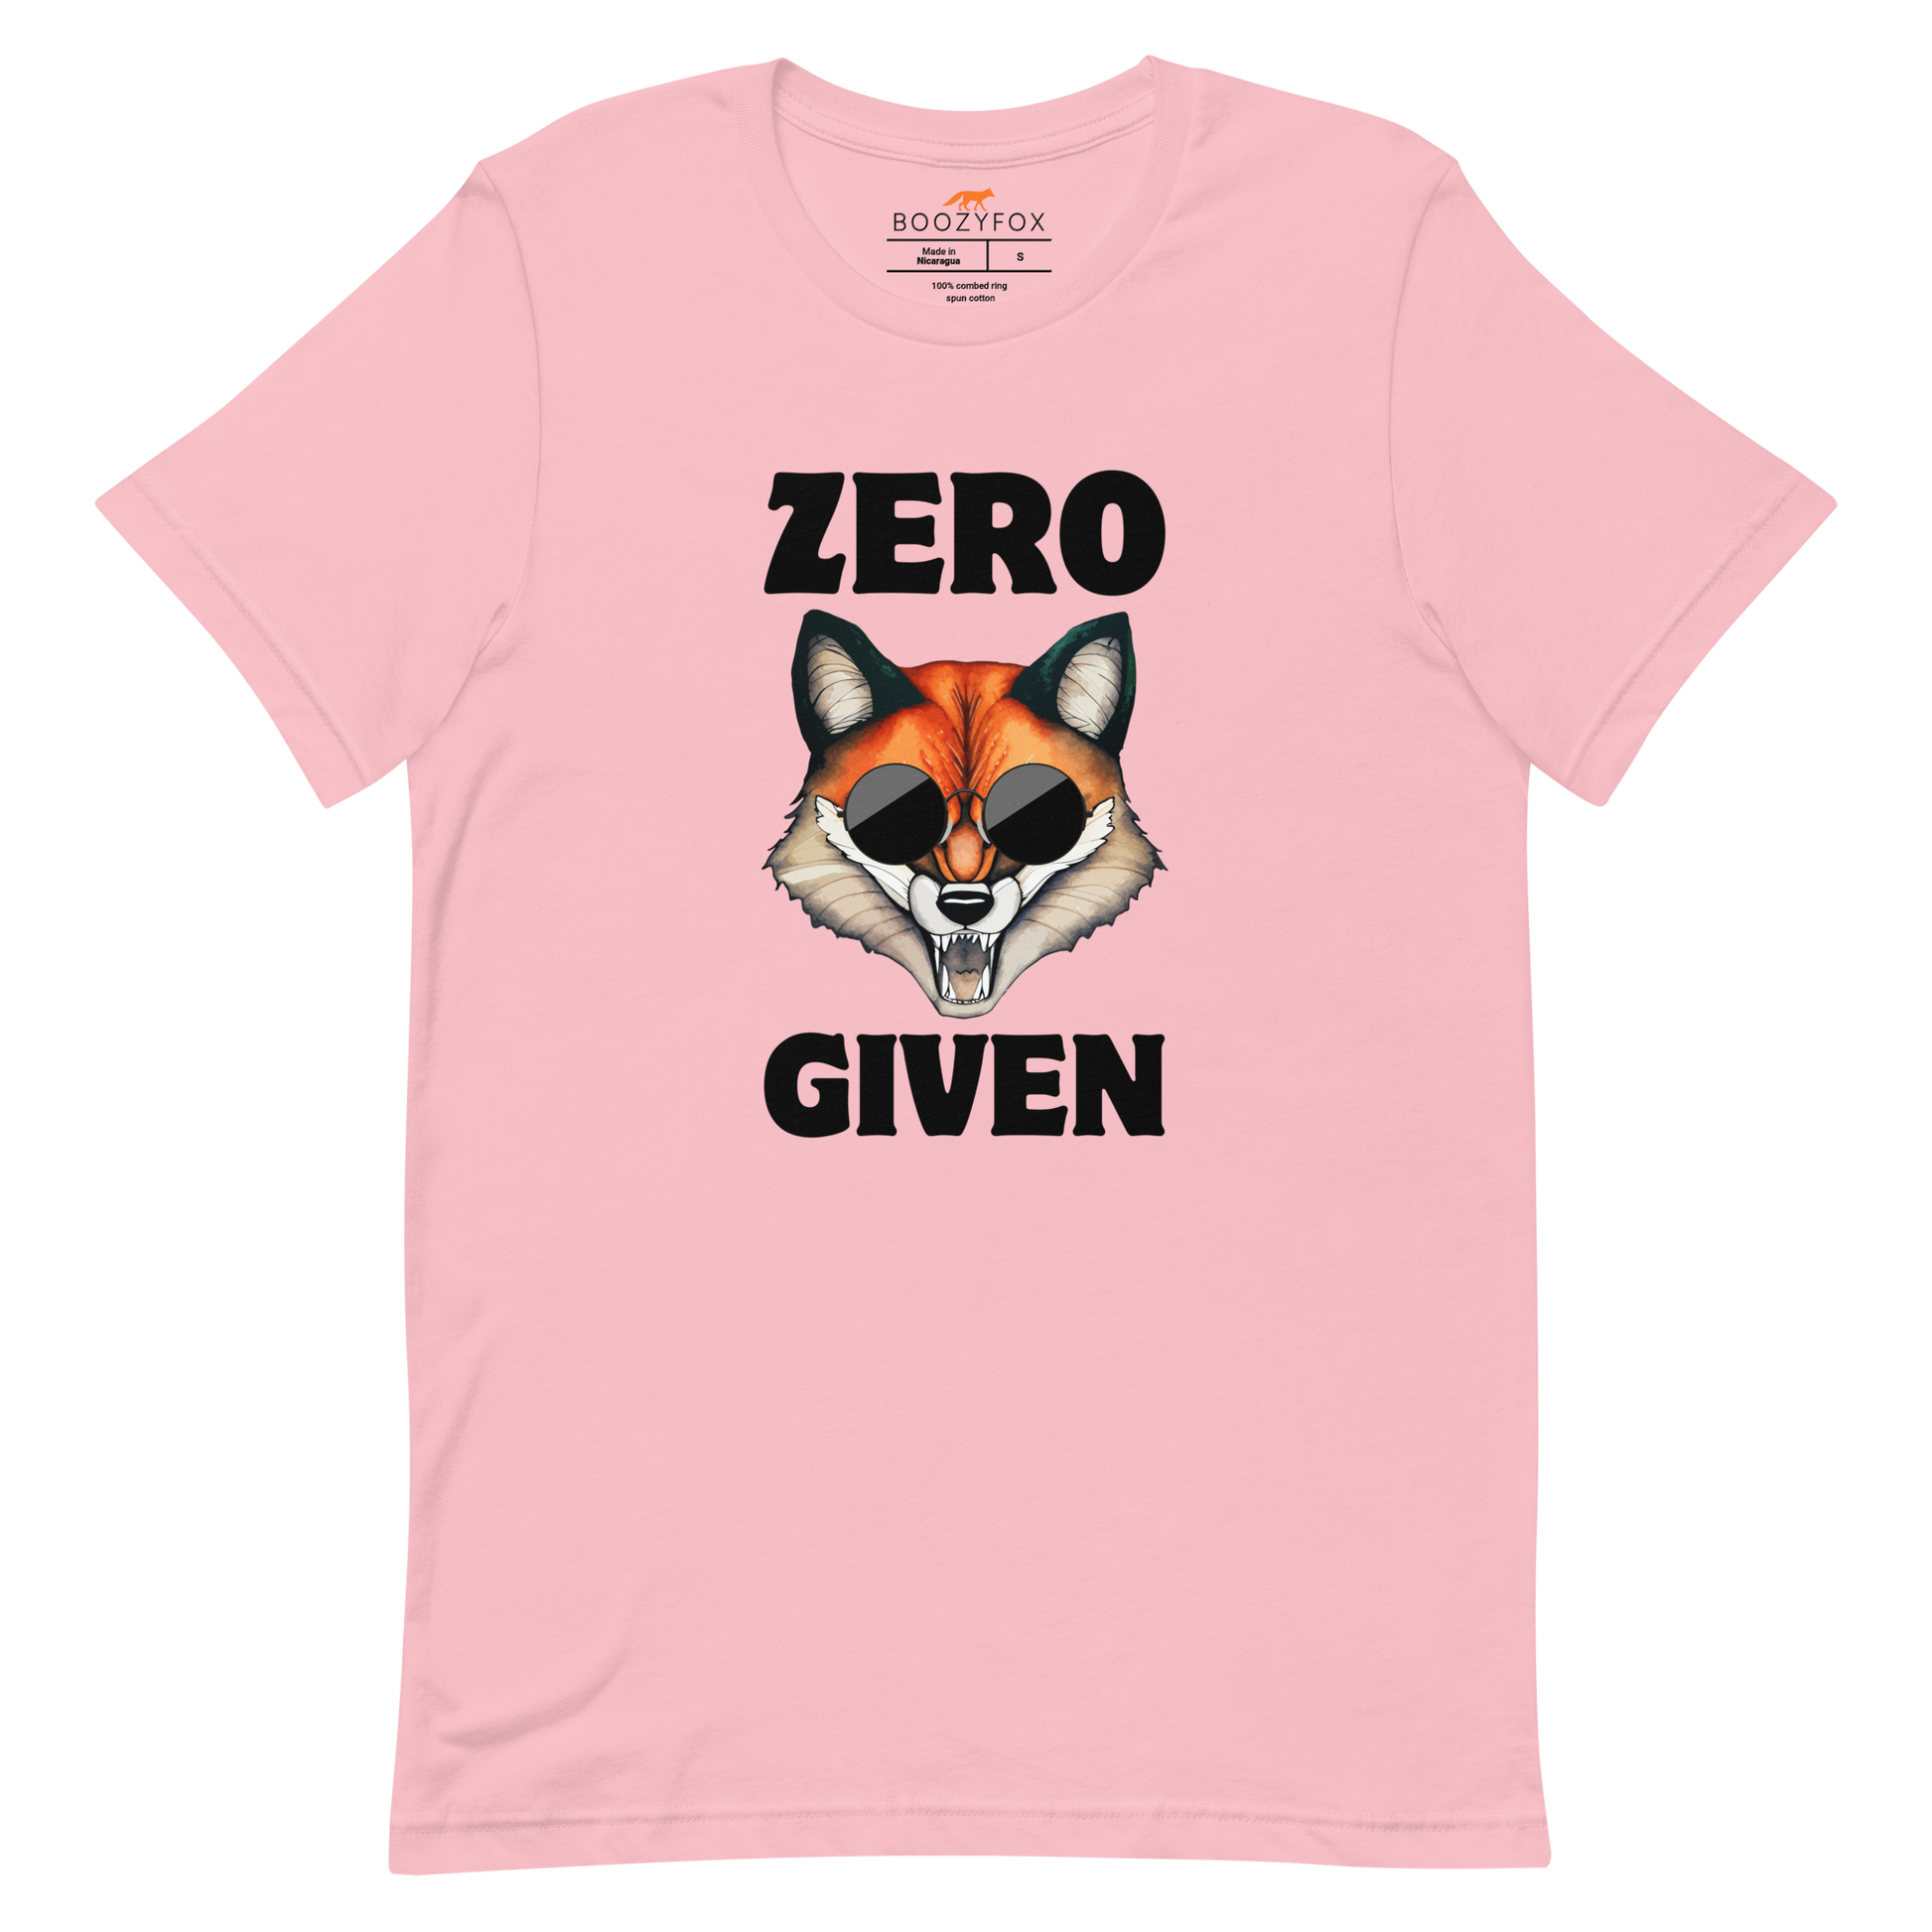 Pink Premium Fox Tee featuring a Zero Fox Given graphic on the chest - Funny Graphic Fox Tees - Boozy Fox